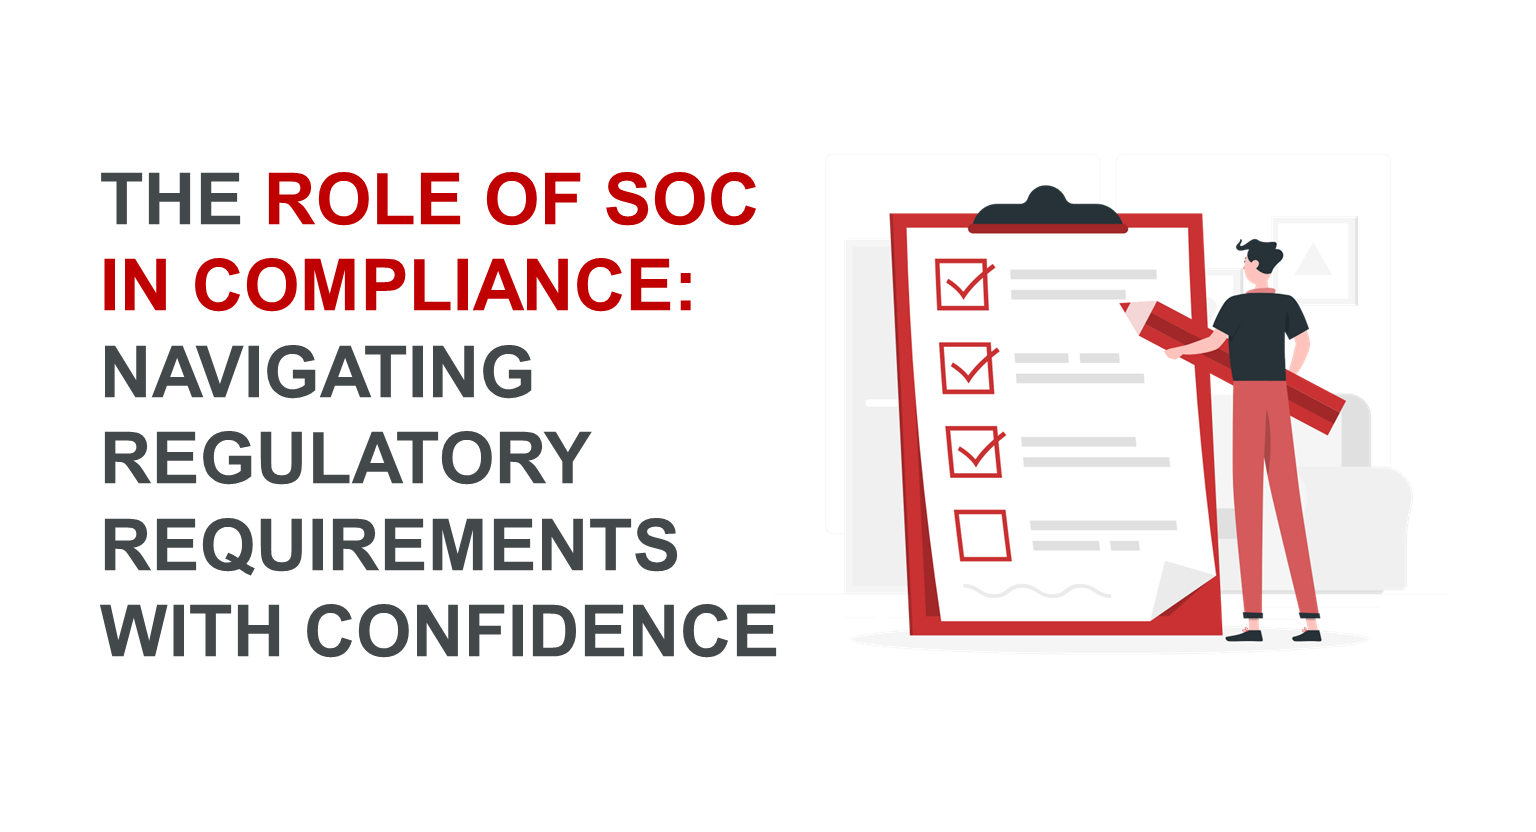 The Role of SOC in Compliance: Navigating Regulatory Requirements with Confidence